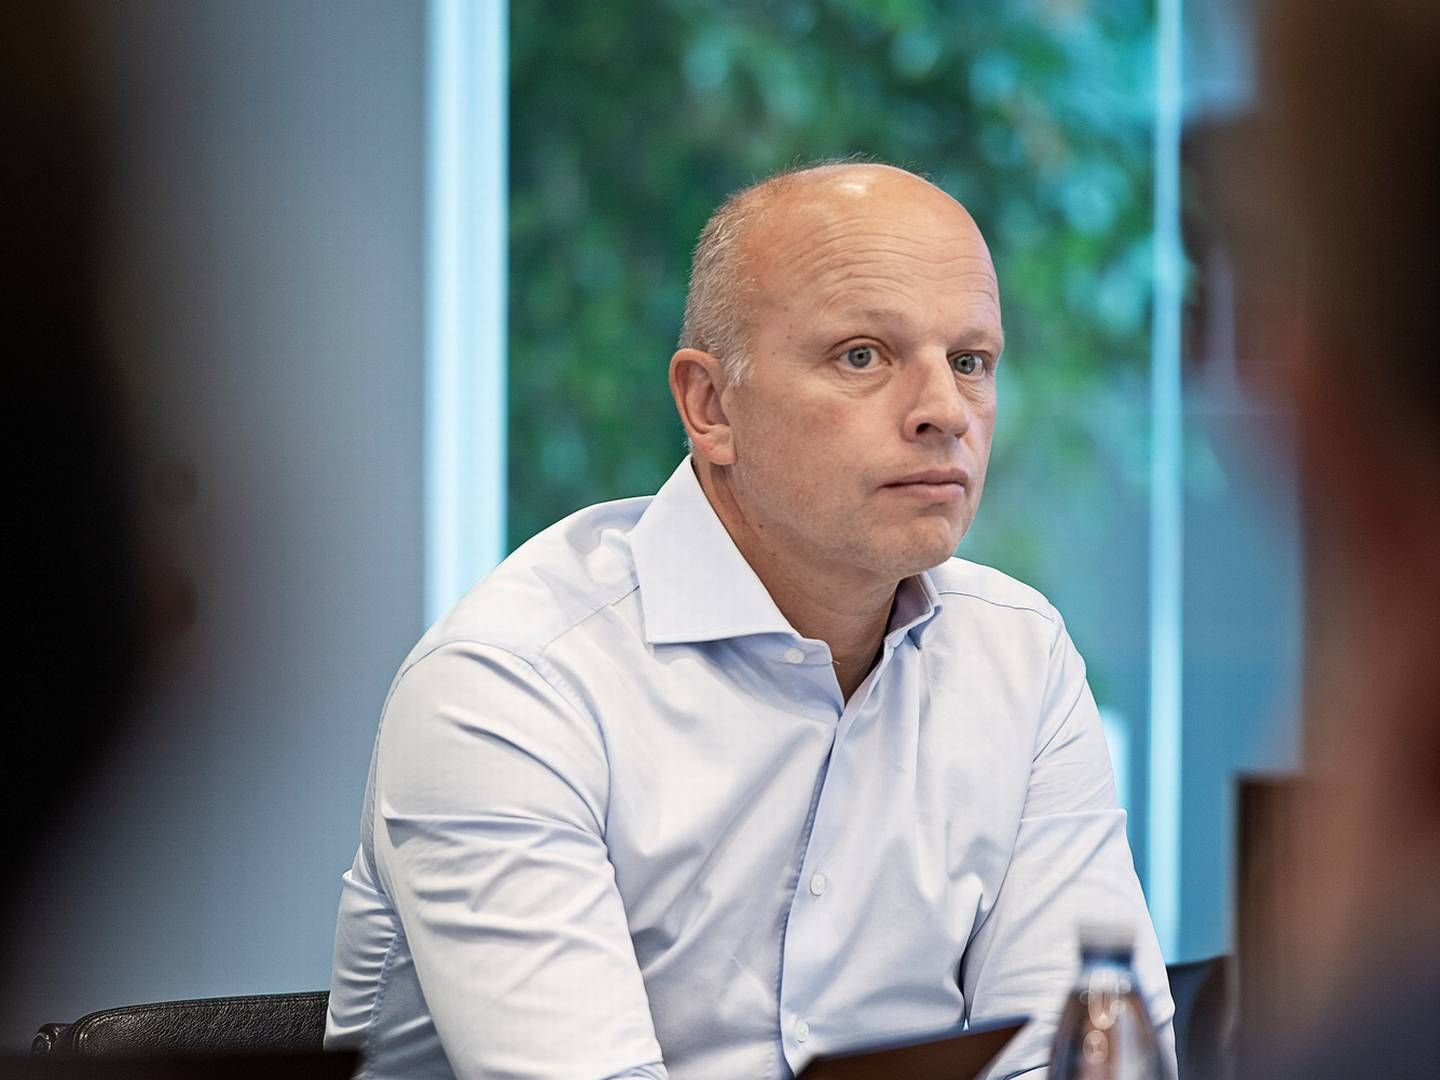 Jens Lund has now resigned from the company PAL Property Invest, which he in 2022 founded and invested in together with, among others, DSV chairman Thomas Plenborg. | Photo: Pr / Dsv